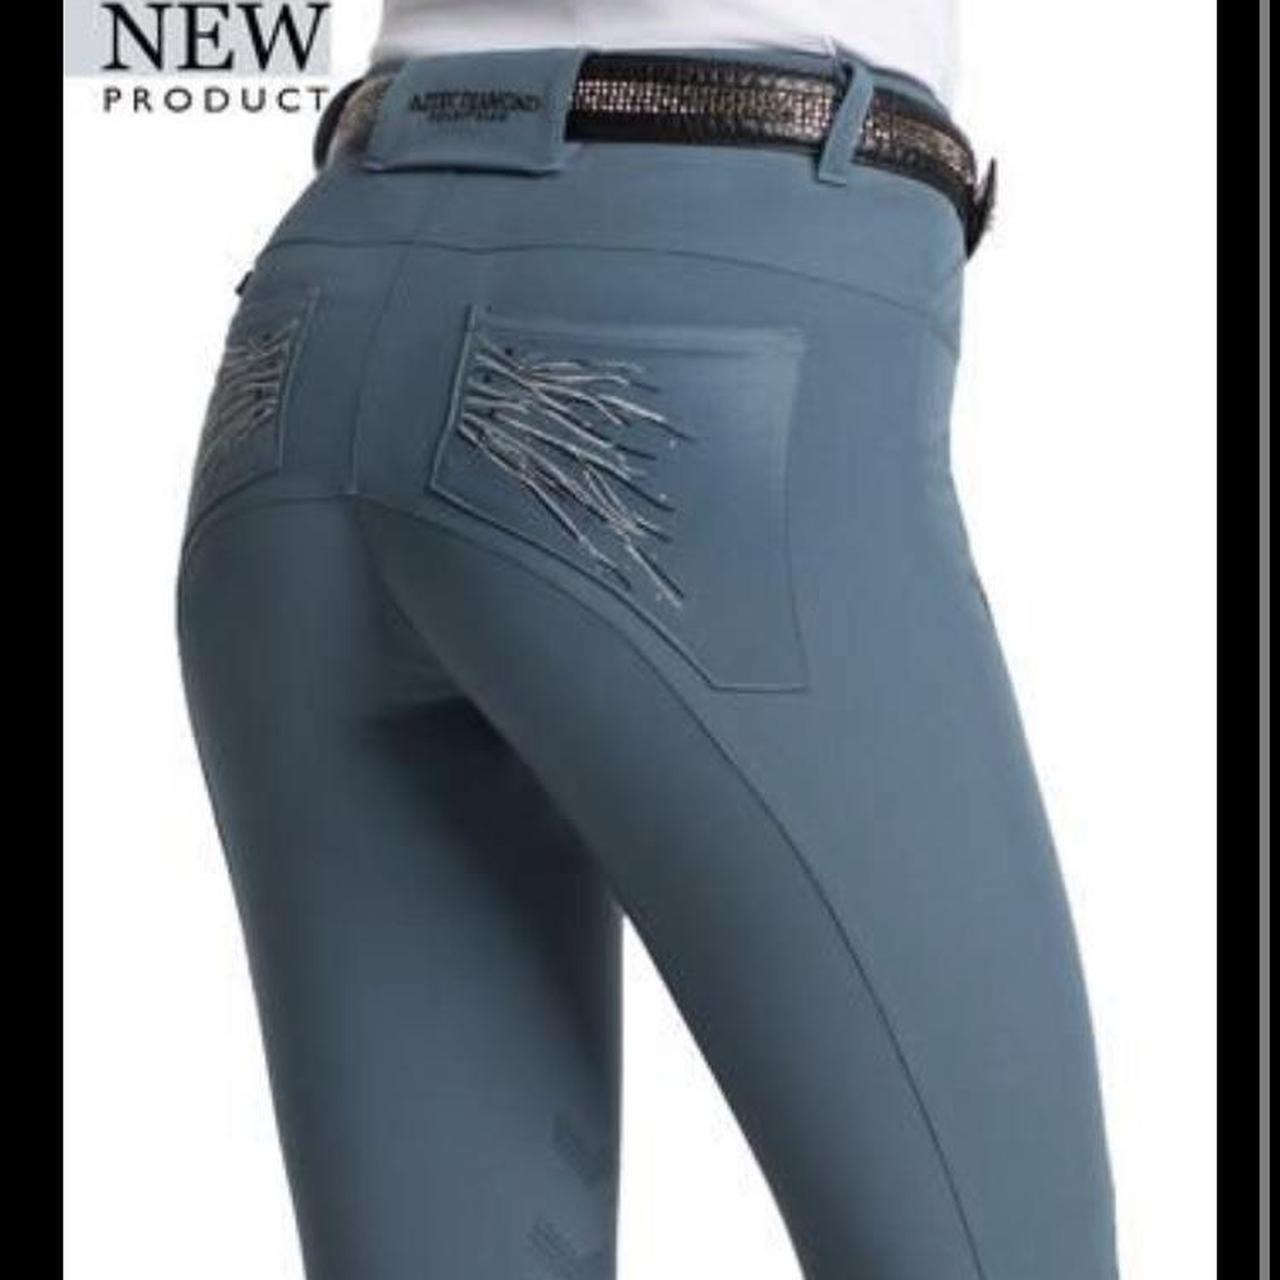 Just Dropped: Fawn in 3 Best Selling Products - Aztec Diamond Equestrian